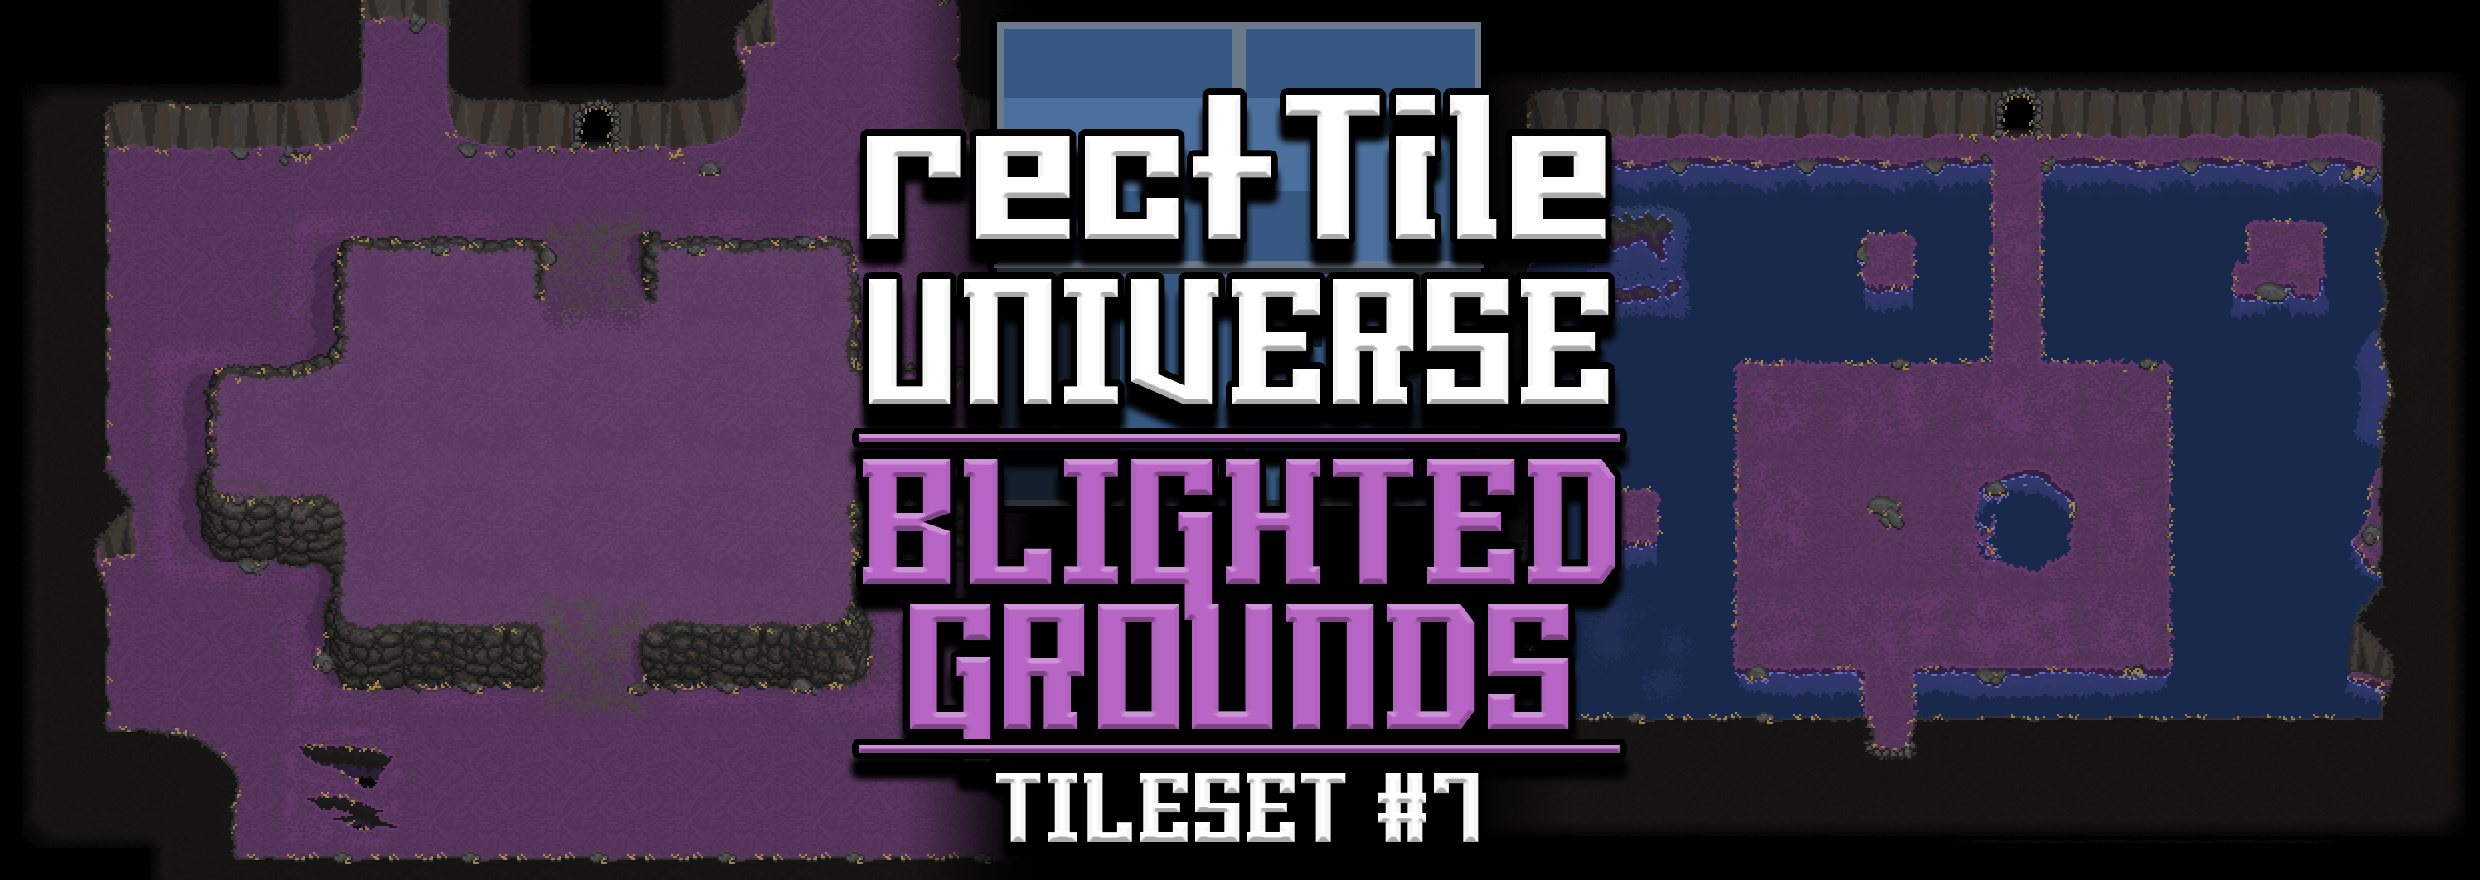 rectTile Universe: Blighted Grounds